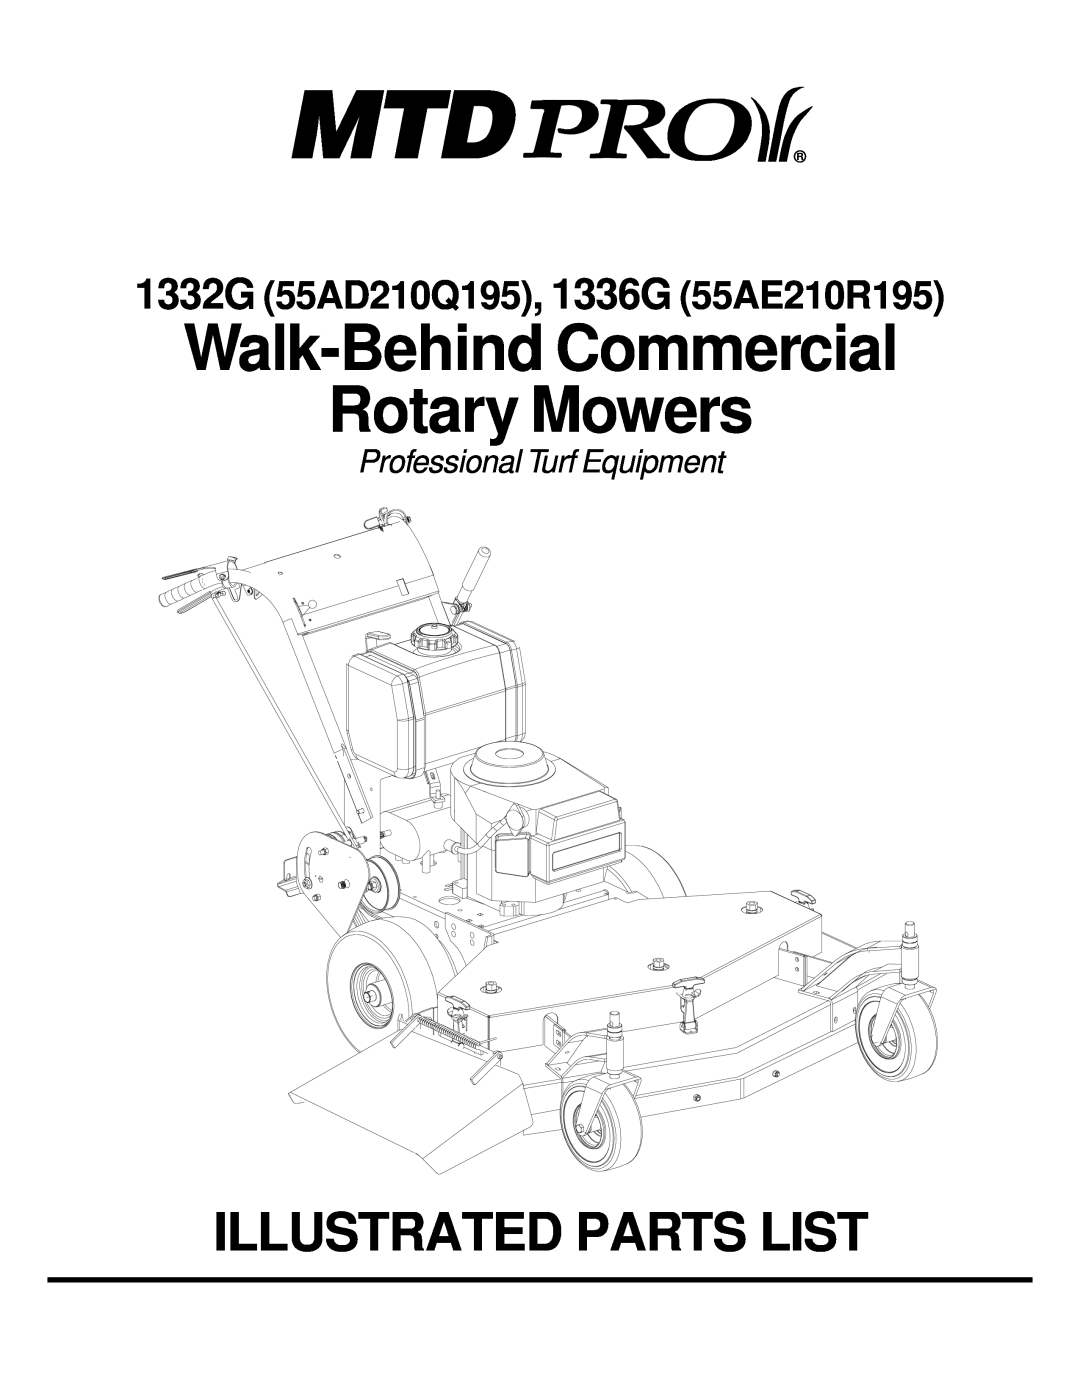 MTD PR-DLSW manual Walk-Behind Commercial Rotary Mowers, Illustrated Parts List, 1332G 55AD210Q195, 1336G 55AE210R195 